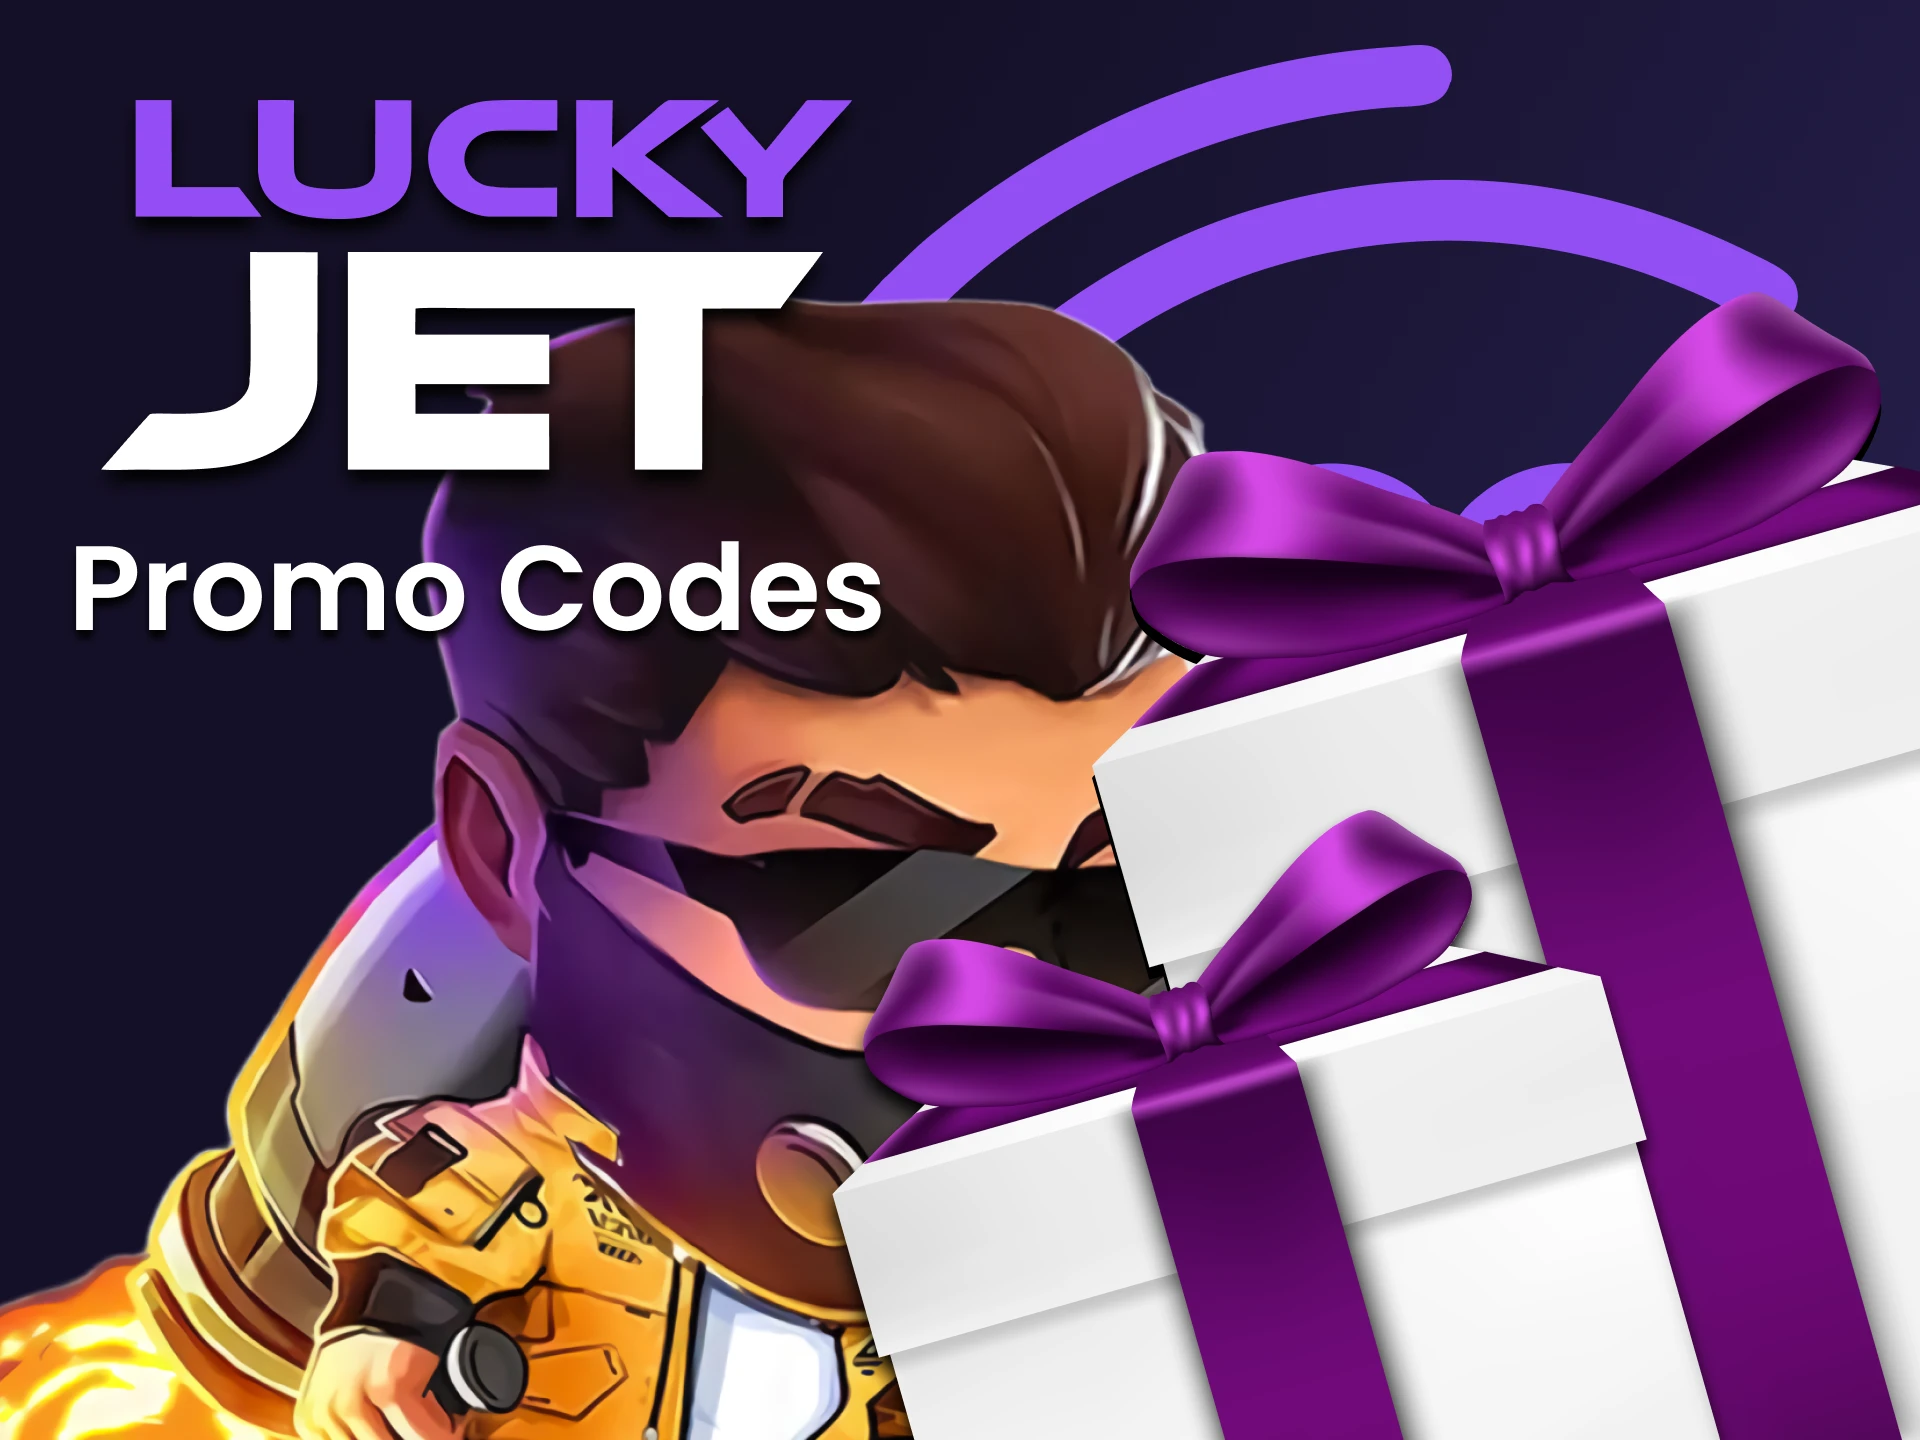 We will tell you about all promotional codes for the game Lucky Jet.